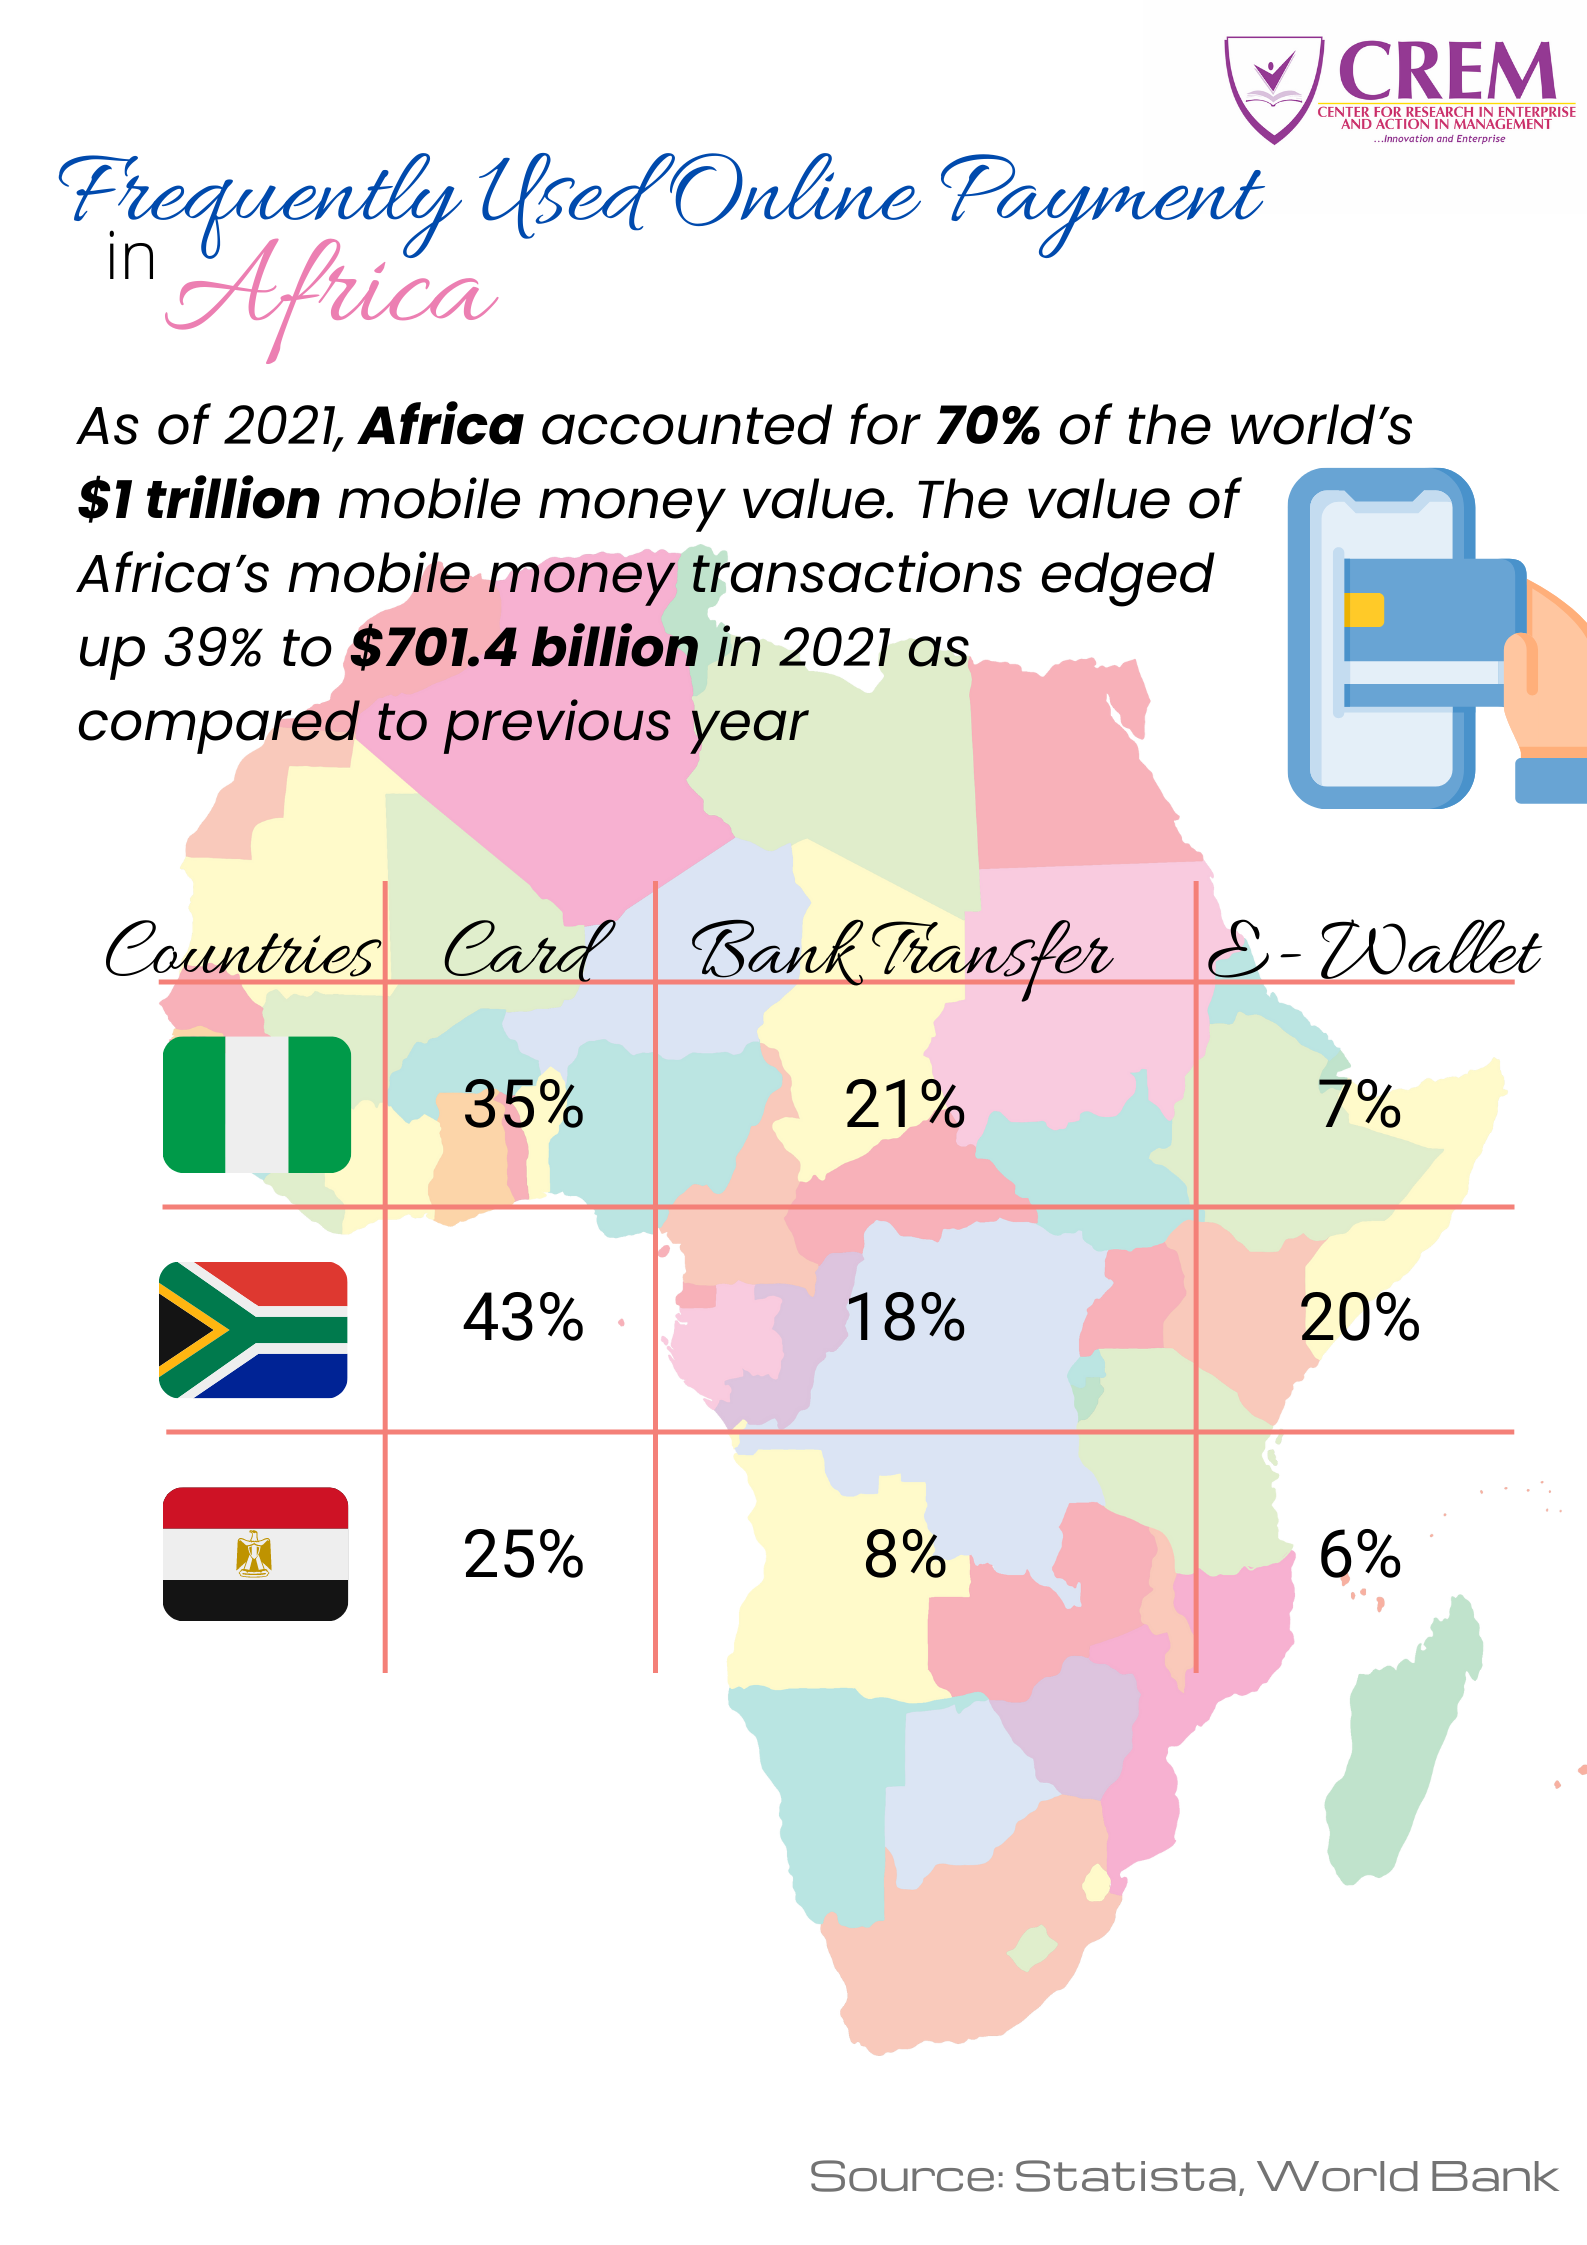 Frequently Used Online Payment in Africa